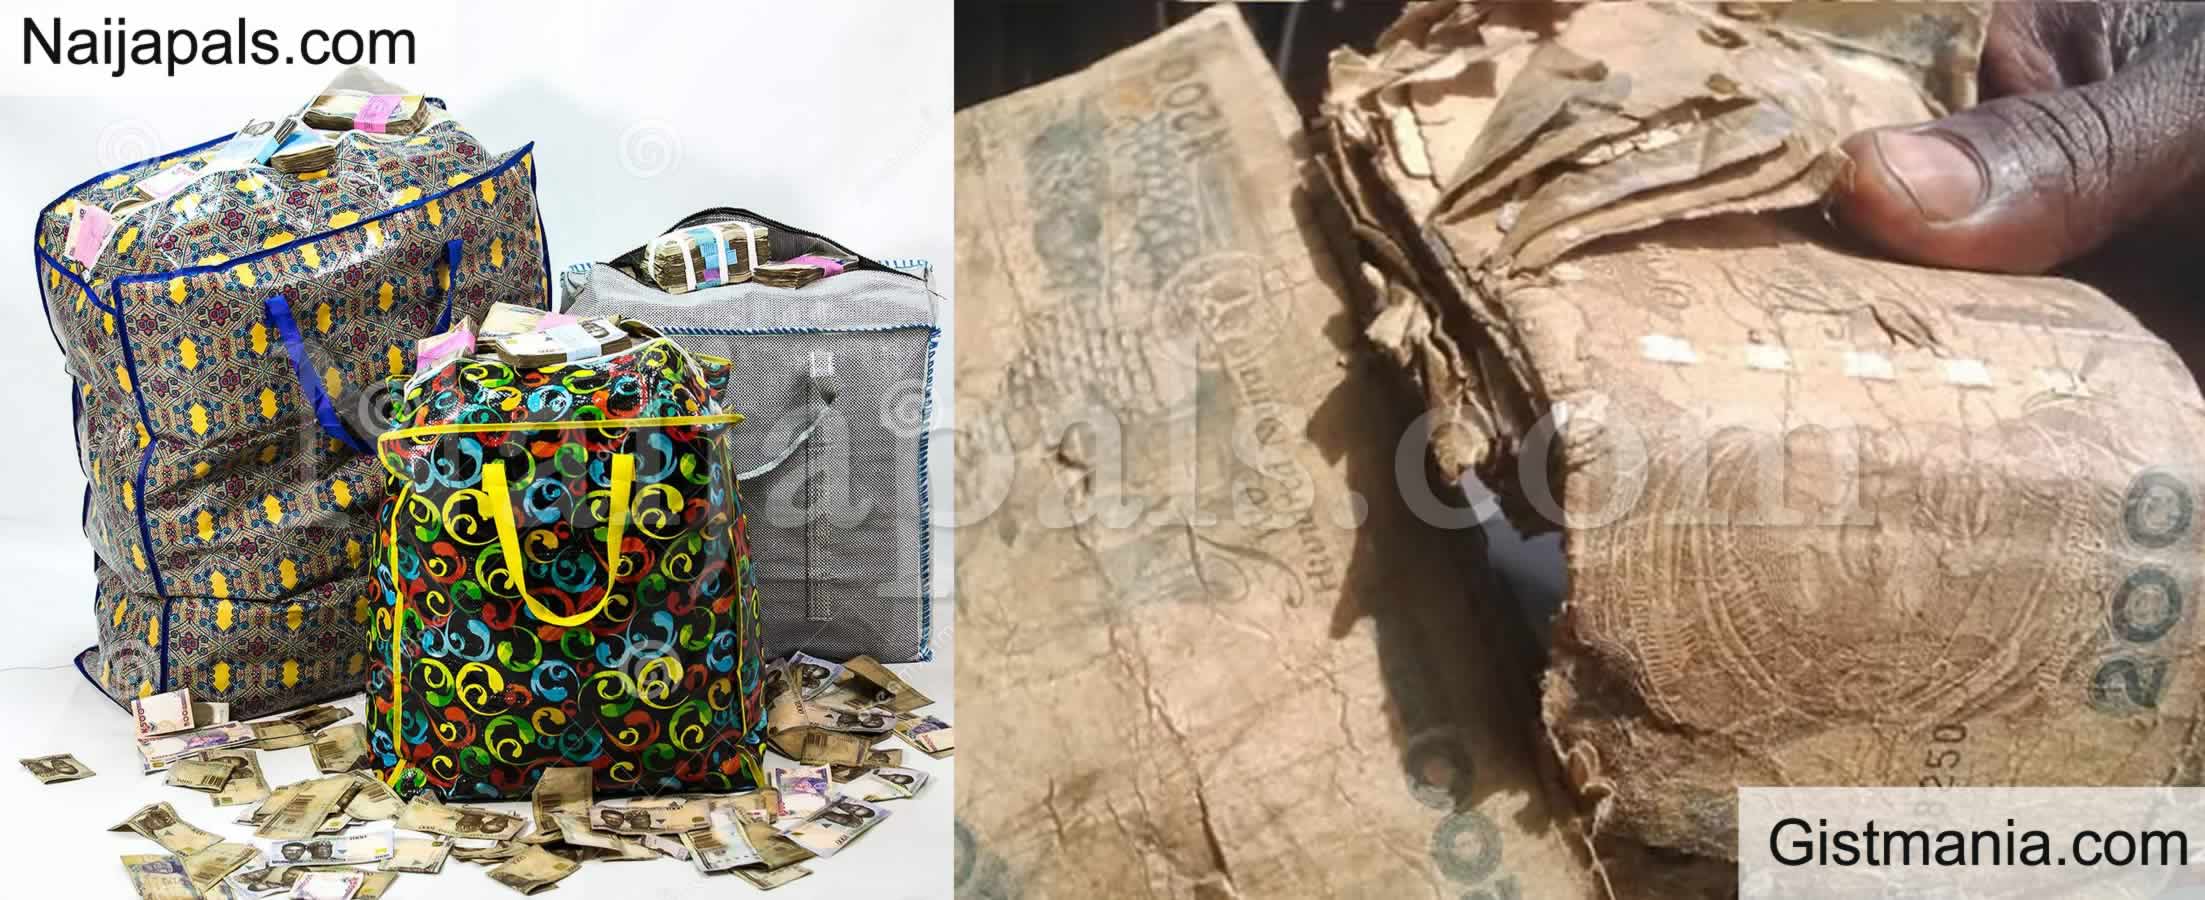 VIDEO: Wads of Spoilt Naira Notes Totaling About N850 Million Found ...